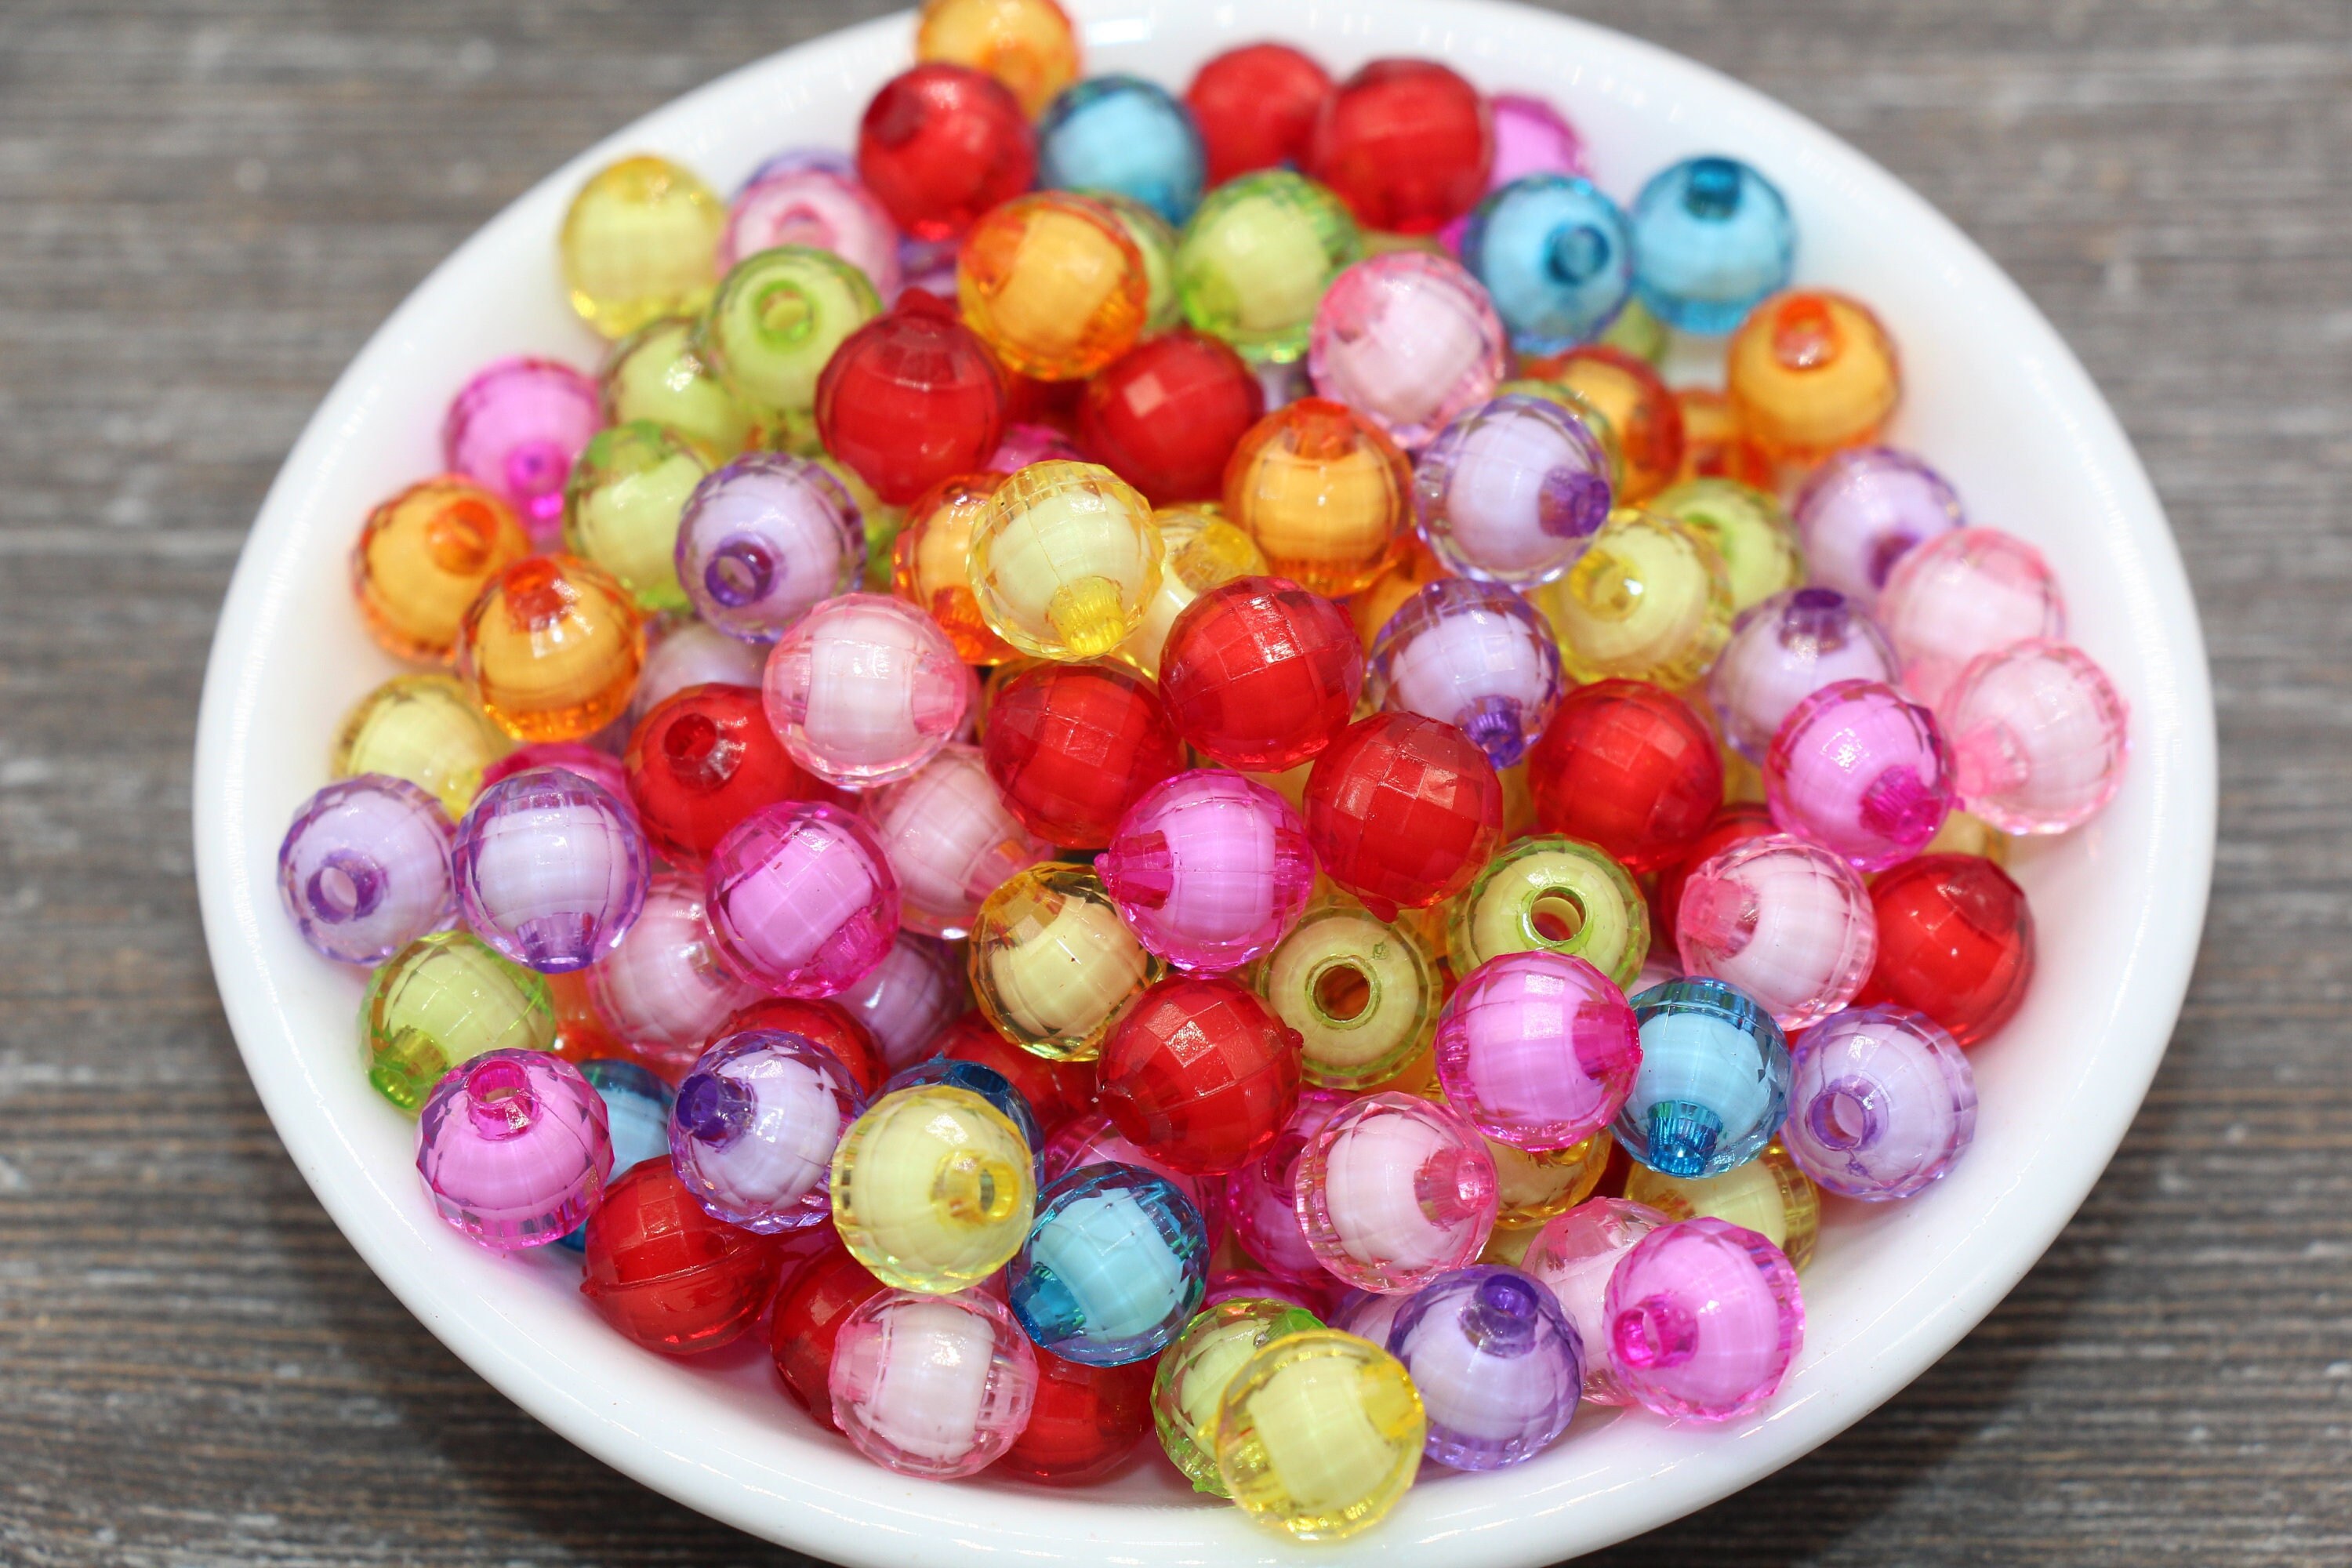 New Spring Pastel Colors Solid Round Gumball Beads 6mm 8mm 10mm